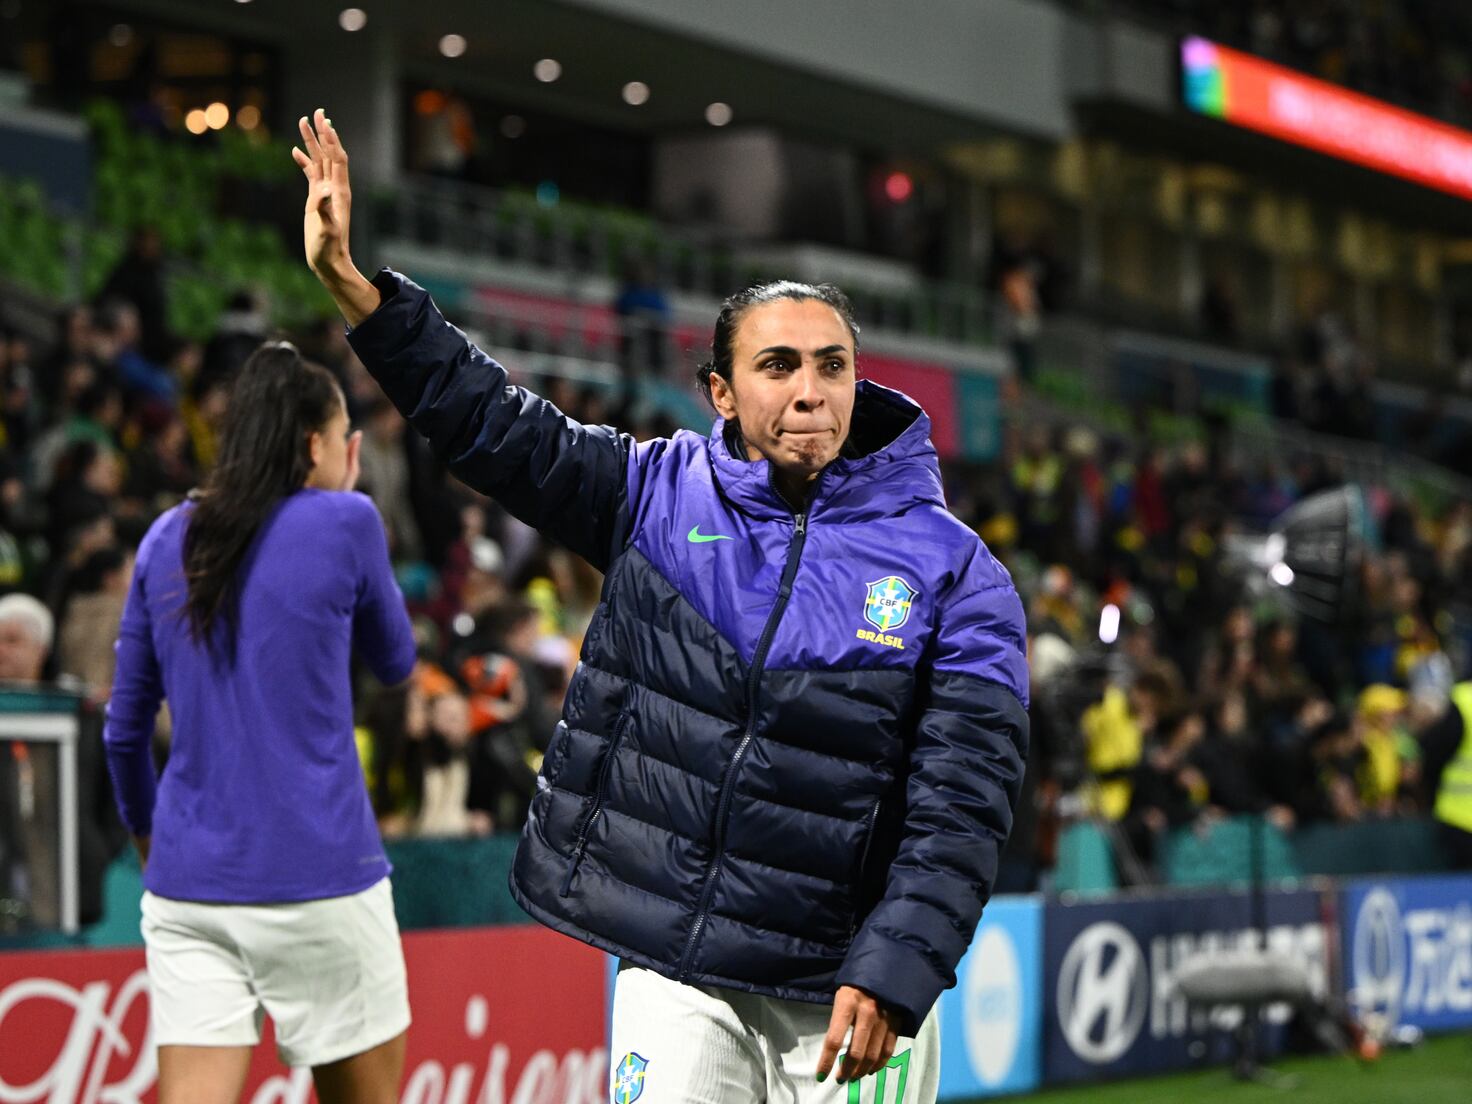 Marta's sixth and final World Cup journey ends in the group stage, players  reach to the legend – Equalizer Soccer